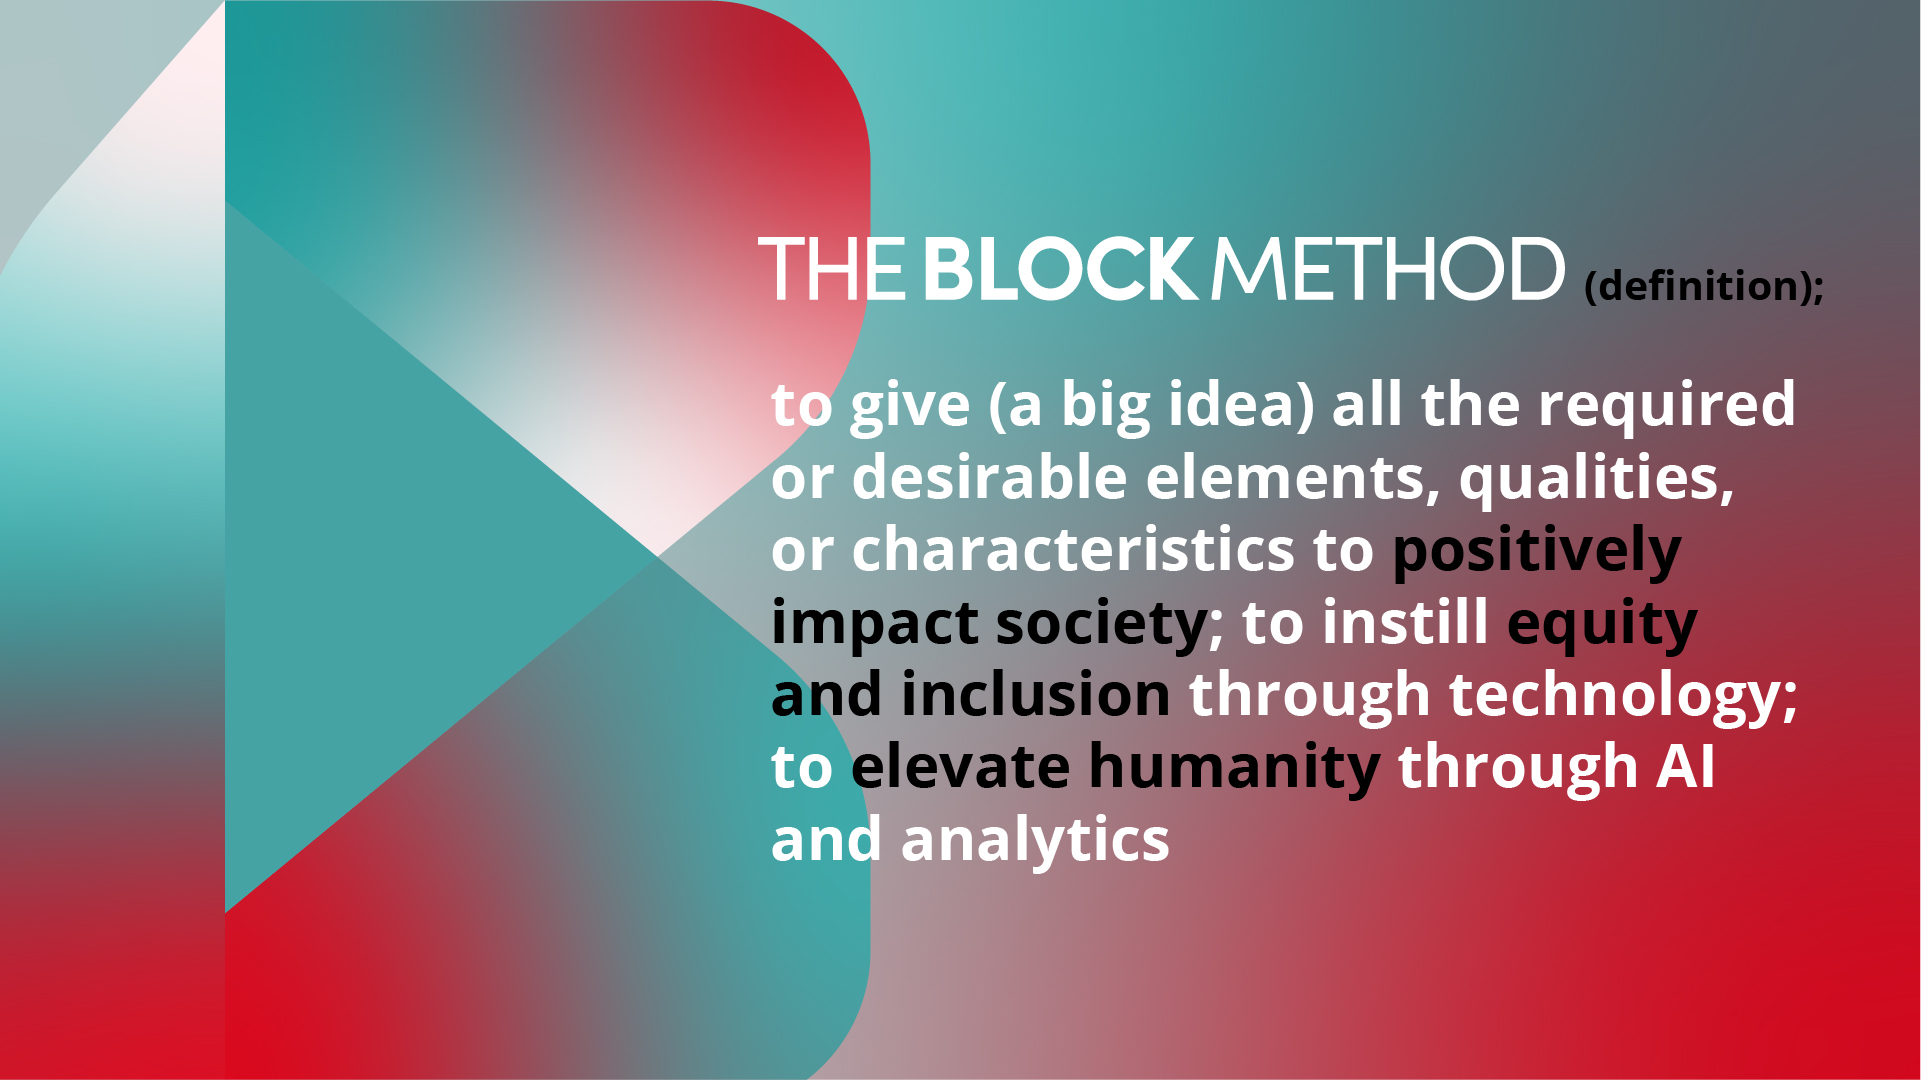 The Block Method (definition): to give (a big idea) all the required or desirable elements, qualities, or characteristics to positively impact society; to instill equity and inclusion through technology; to elevate humanity through AI and analytics